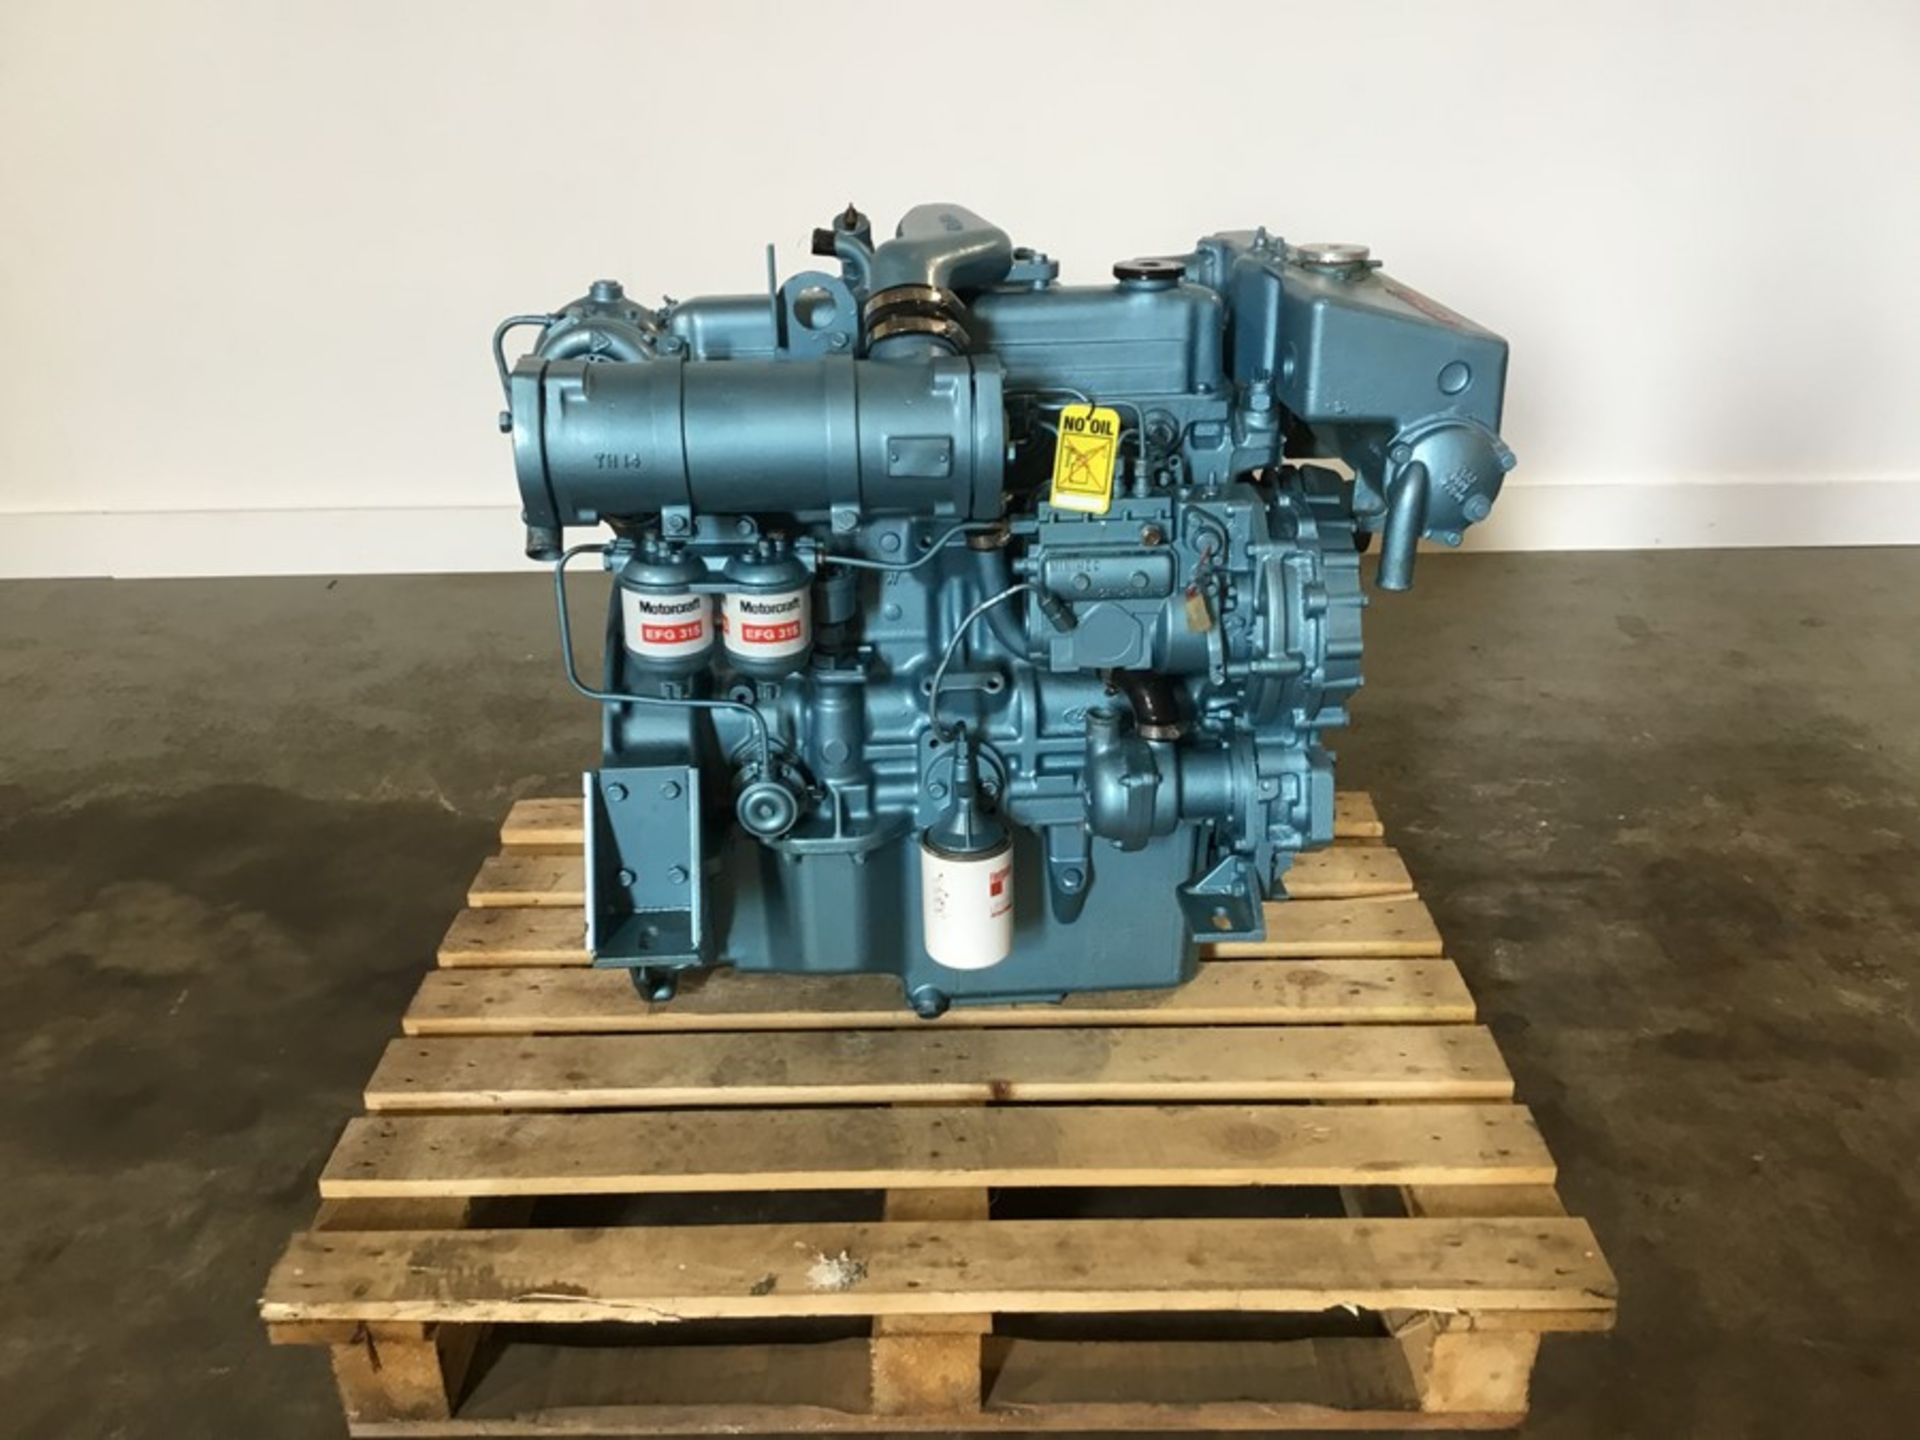 Ford 2722E Marine Diesel engine: Ford 2722e 4cyl Turbo 140Hp @2500Rpm used low hours - Image 7 of 18